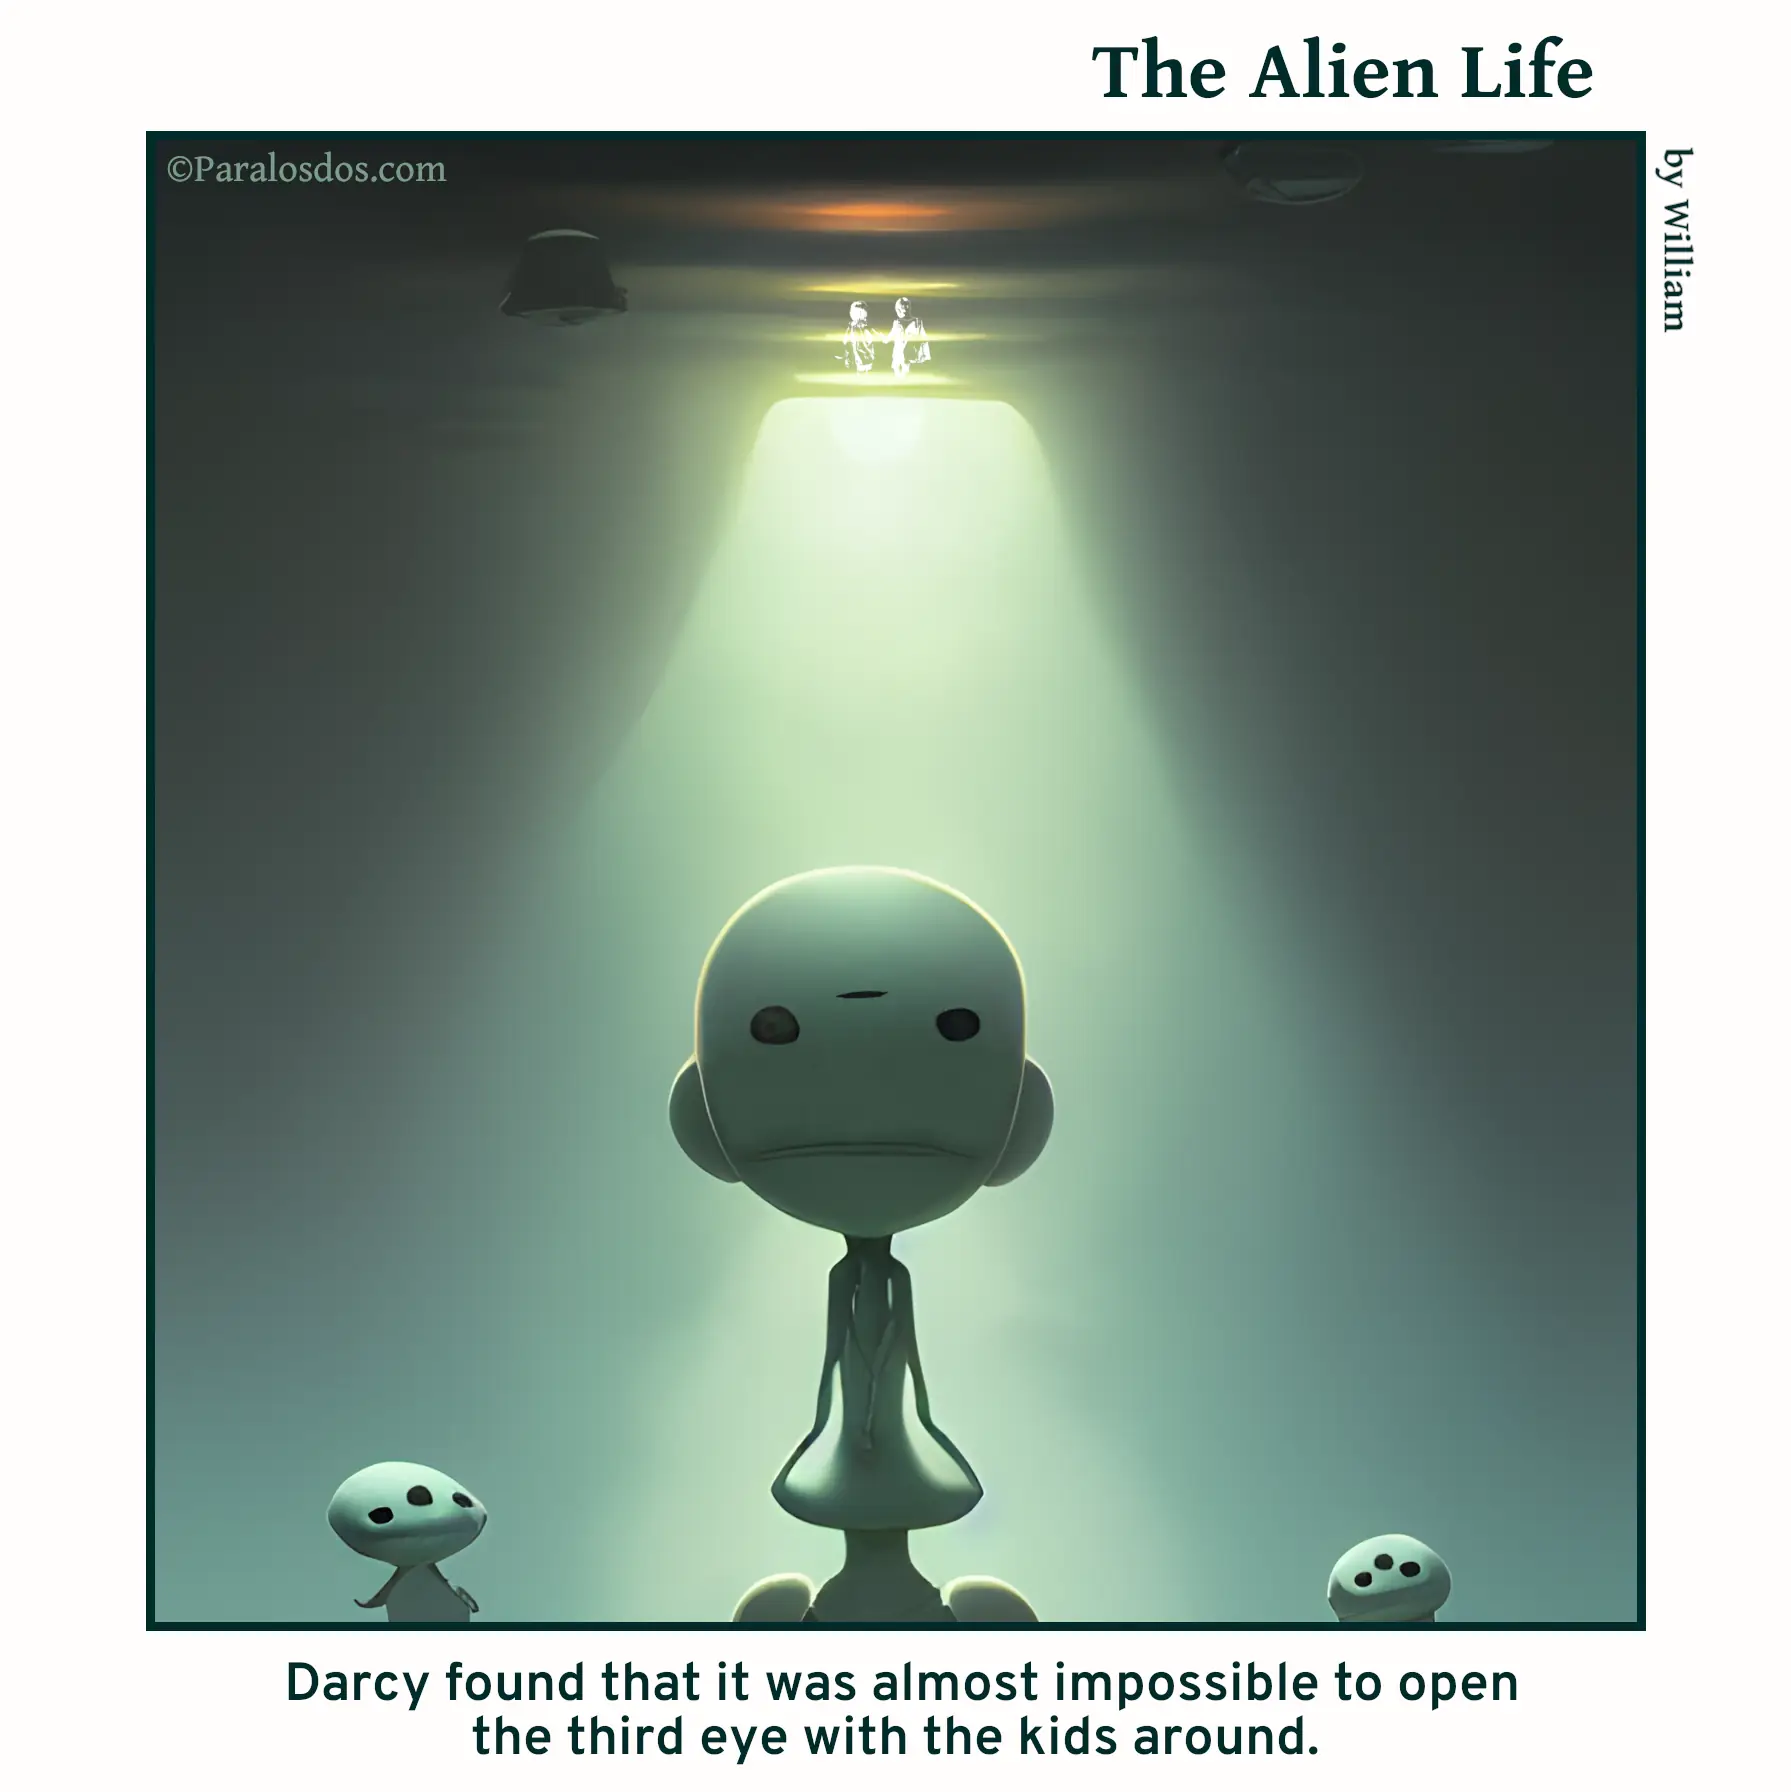 The Alien Life, one panel Comic. An Alien adult is meditating while two alien kids are hovering. They all have three eyes but the adult has the middle one closed. The caption reads: "Darcy found that it was almost impossible to open the third eye with the kids around."